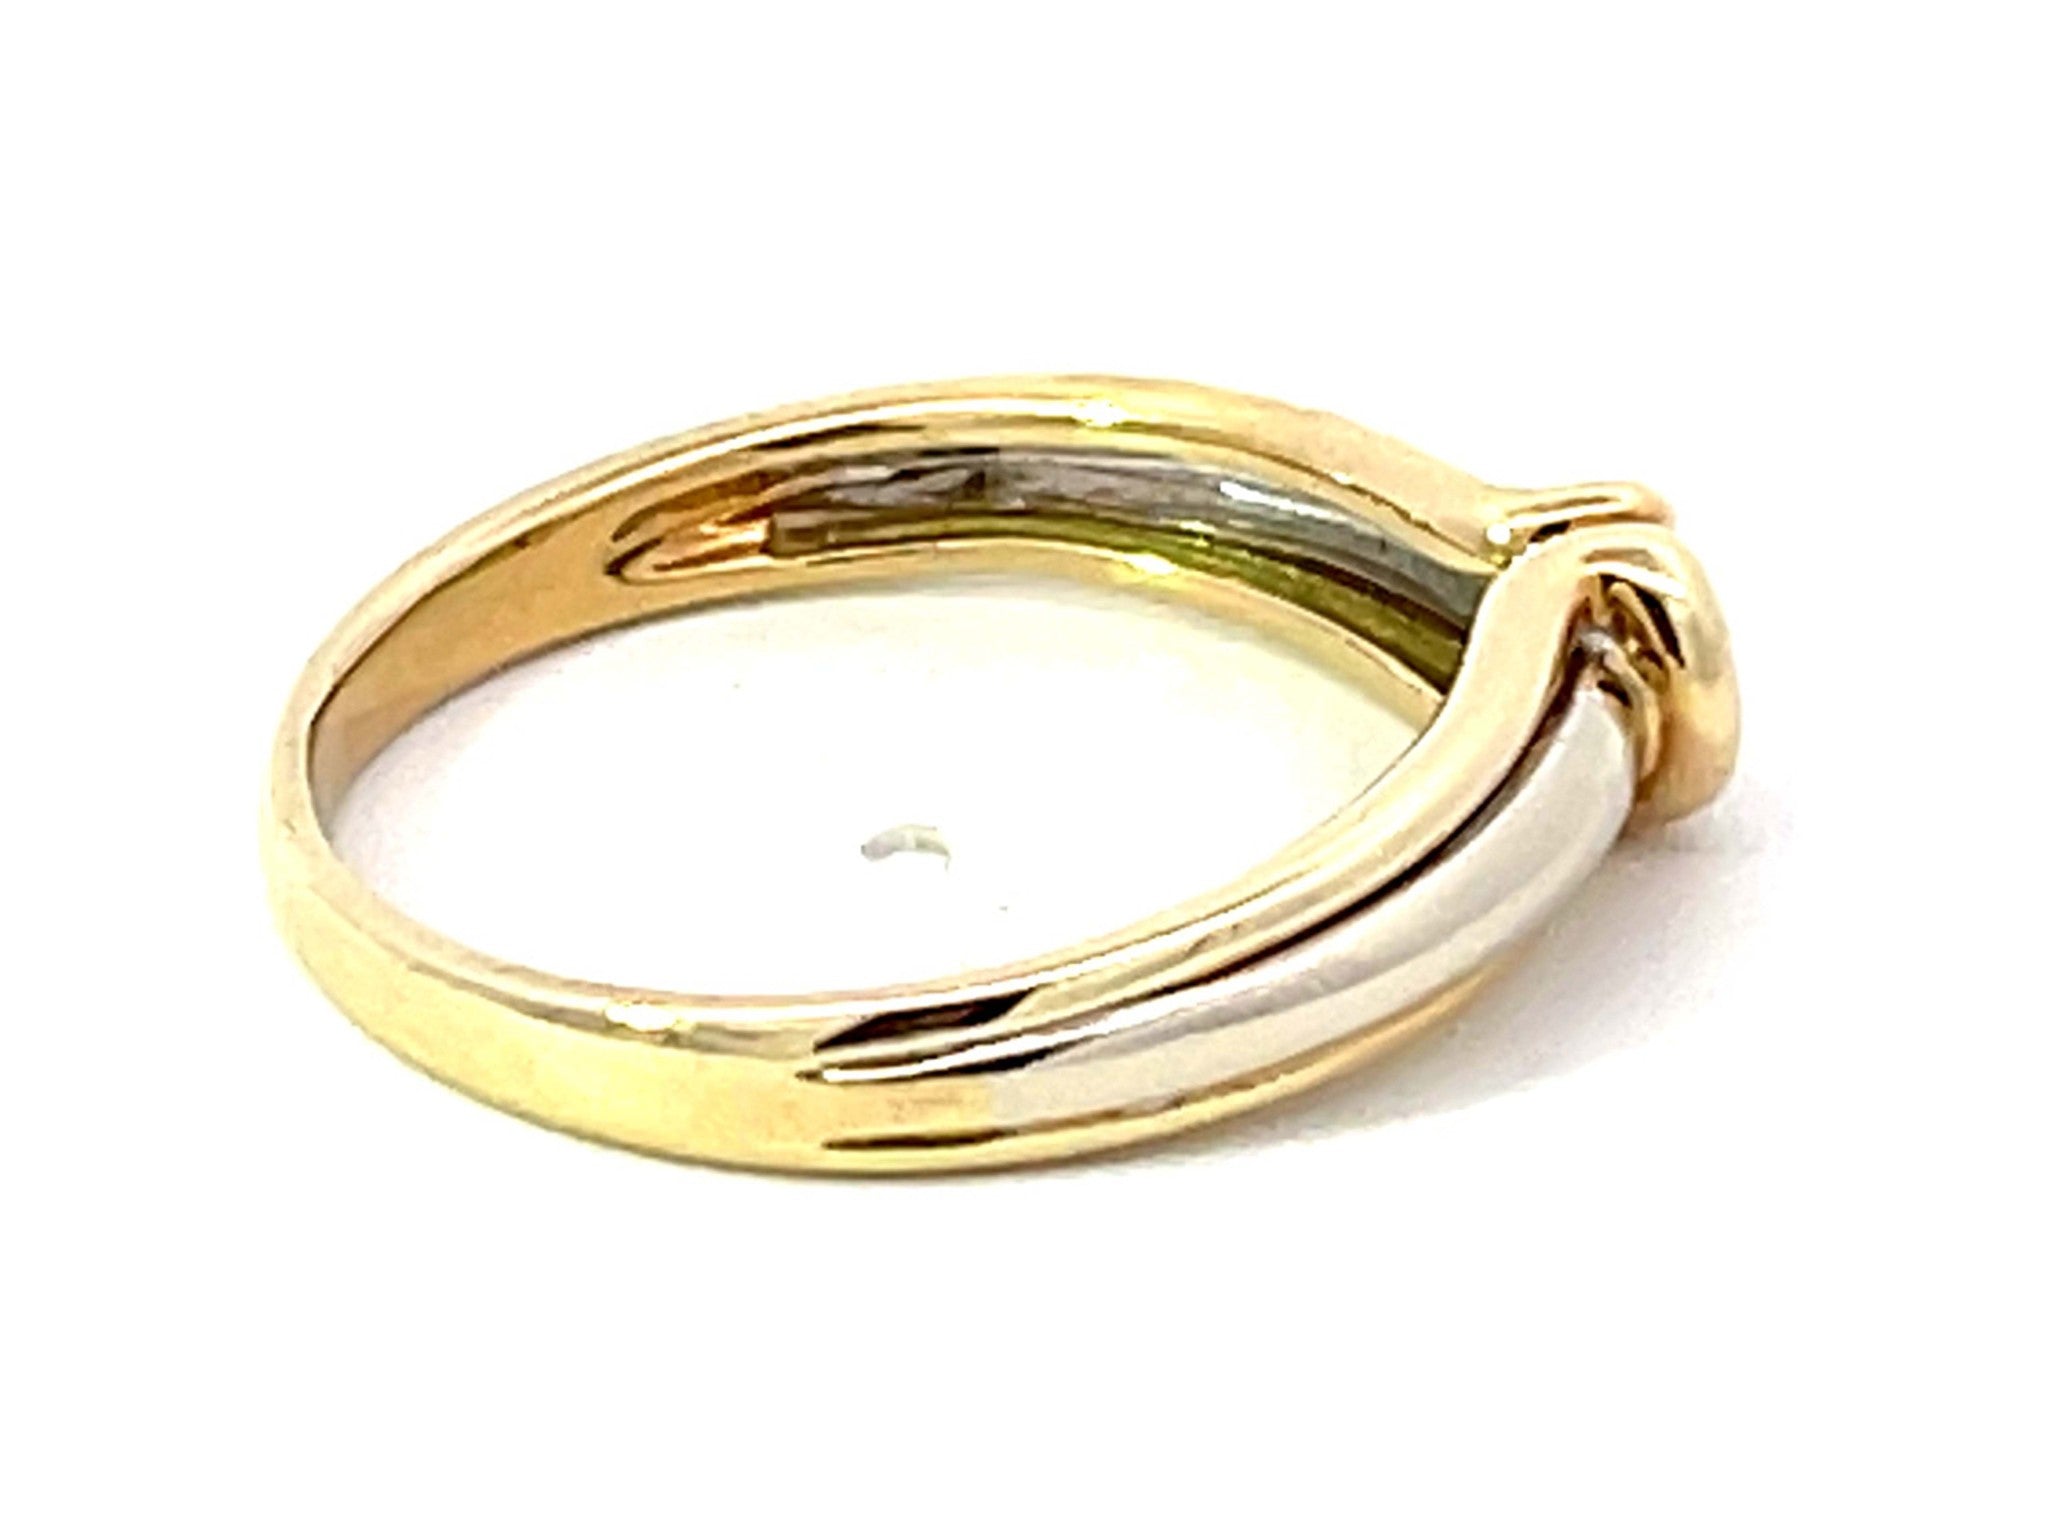 Solitaire Diamond Two Toned Ring in 14K Gold